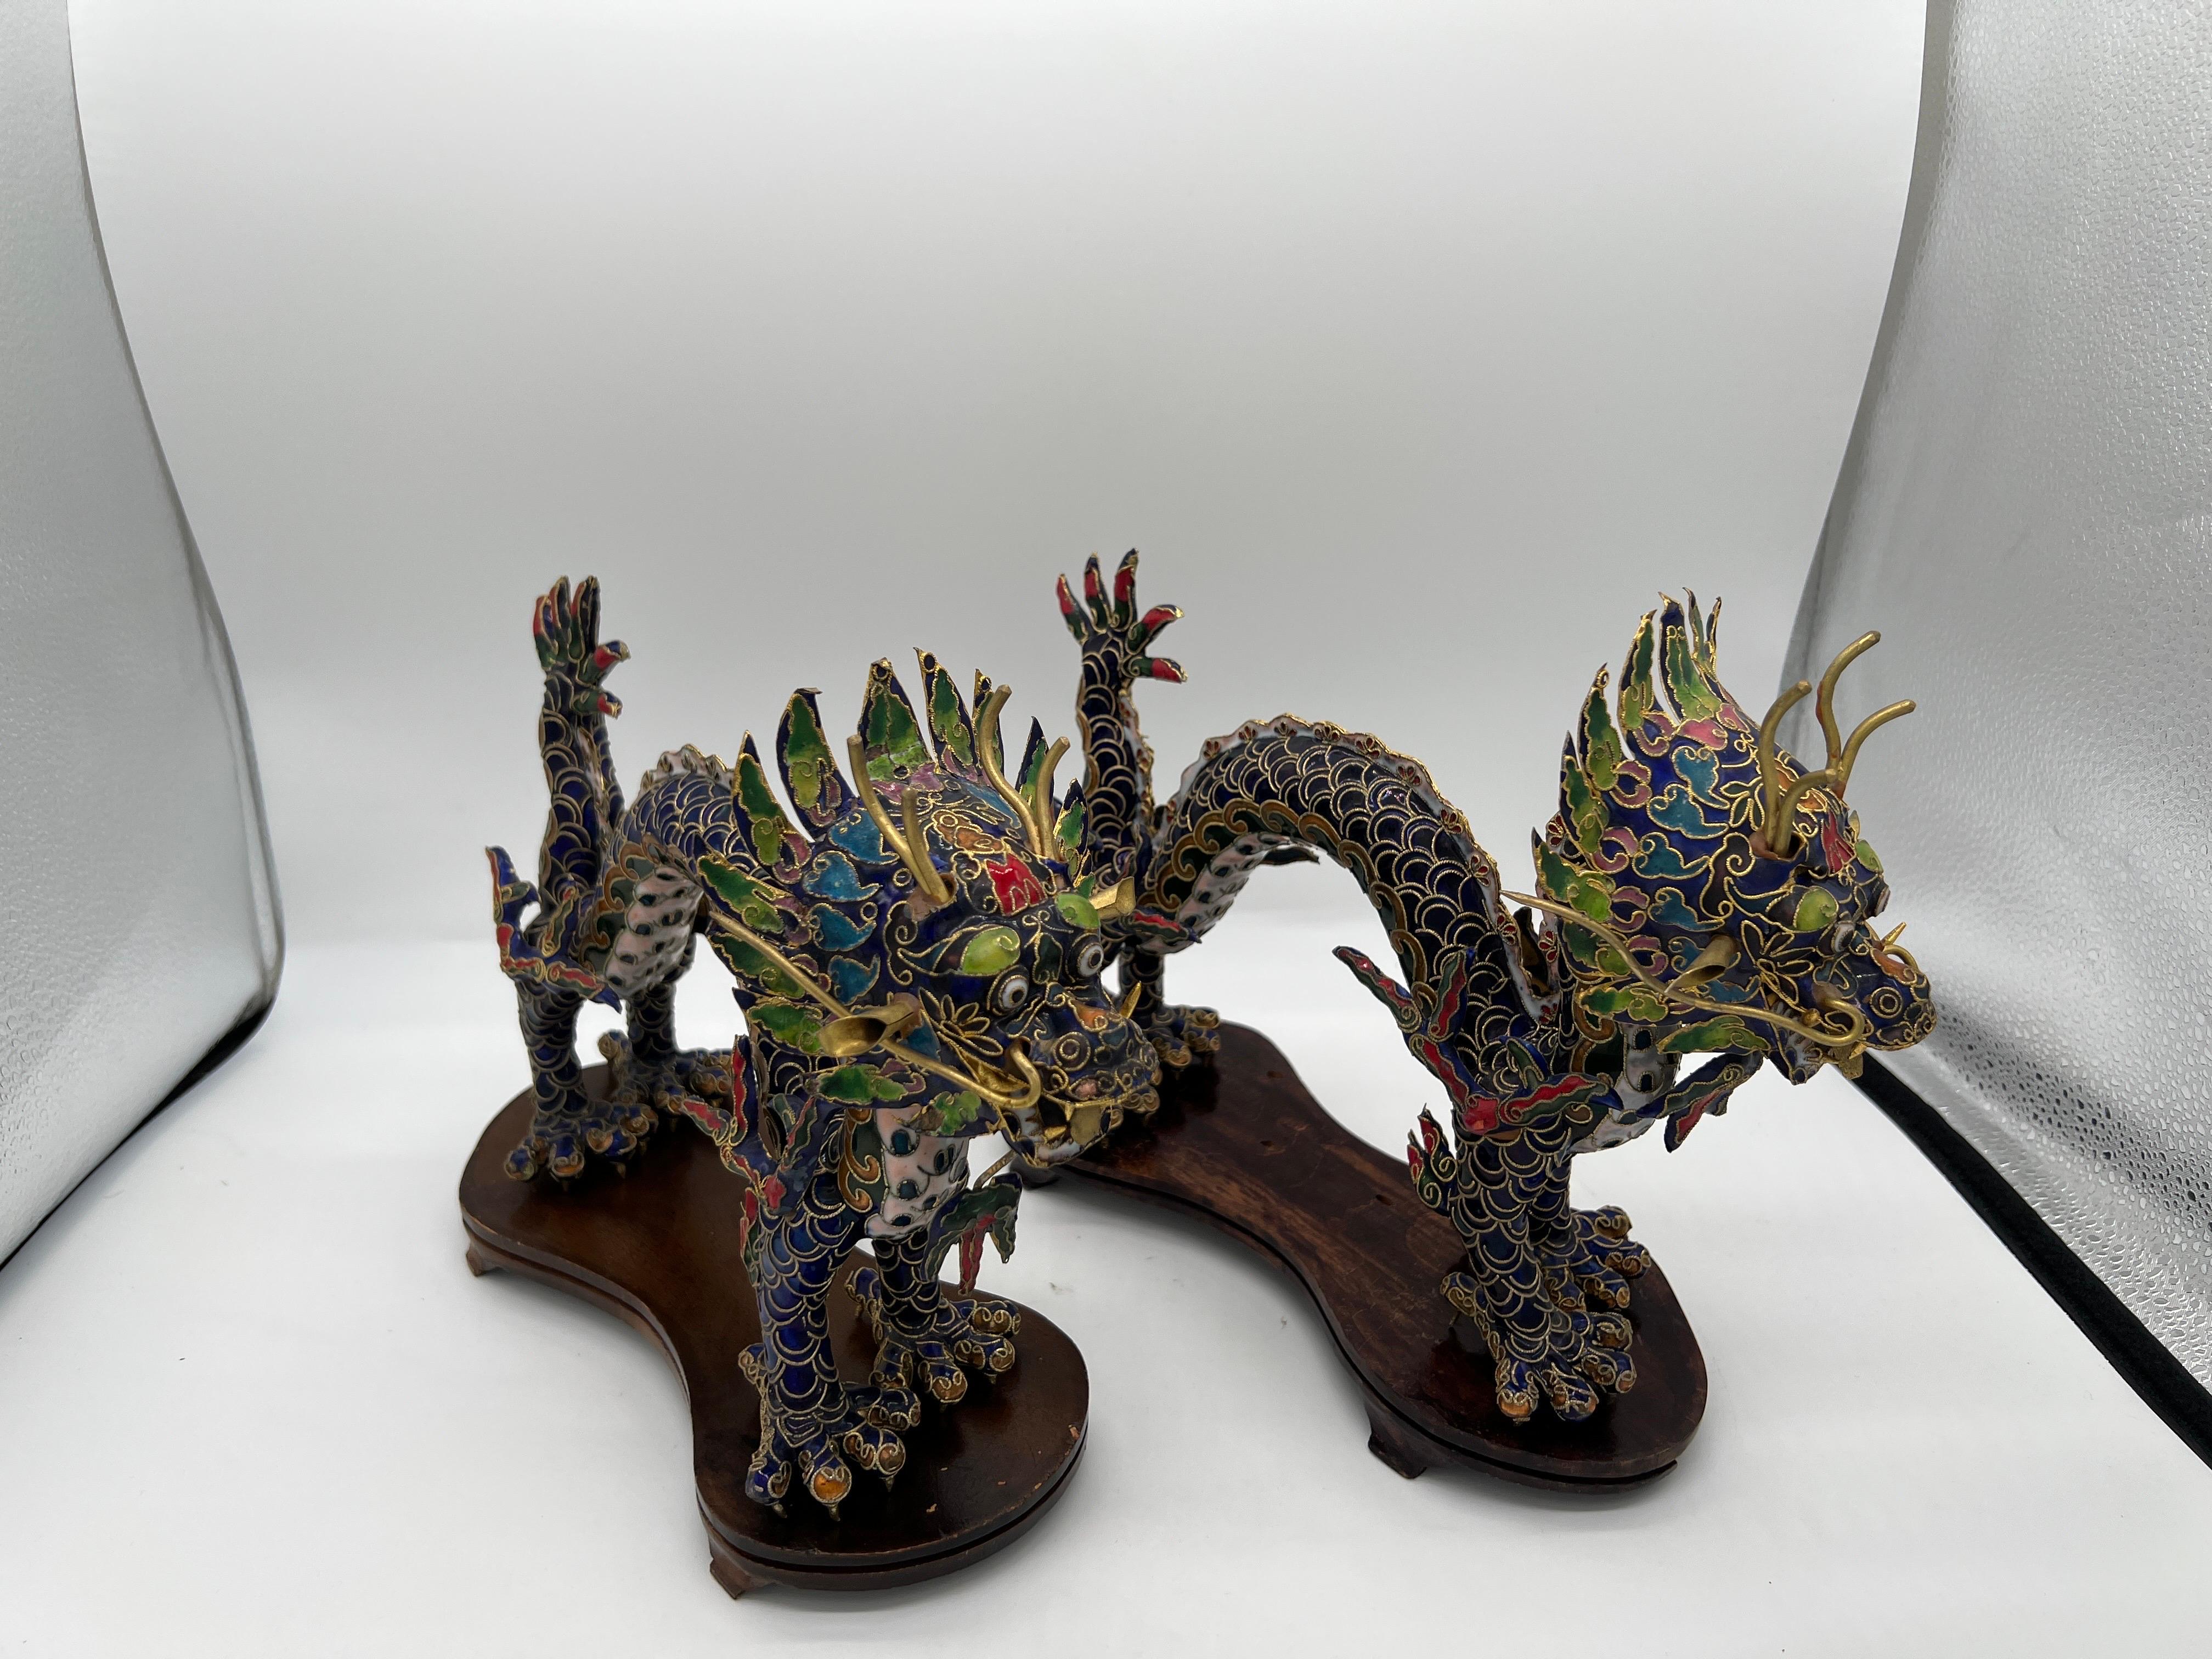 Chinese, 20th century.

A pair of Chinese export style cloisonne dragon figurines on stands. Each dragon is detailed with brass wiring and hand enamel decorated across the surfaces. Chinese dragons are often a sign of good luck and power. Dragons